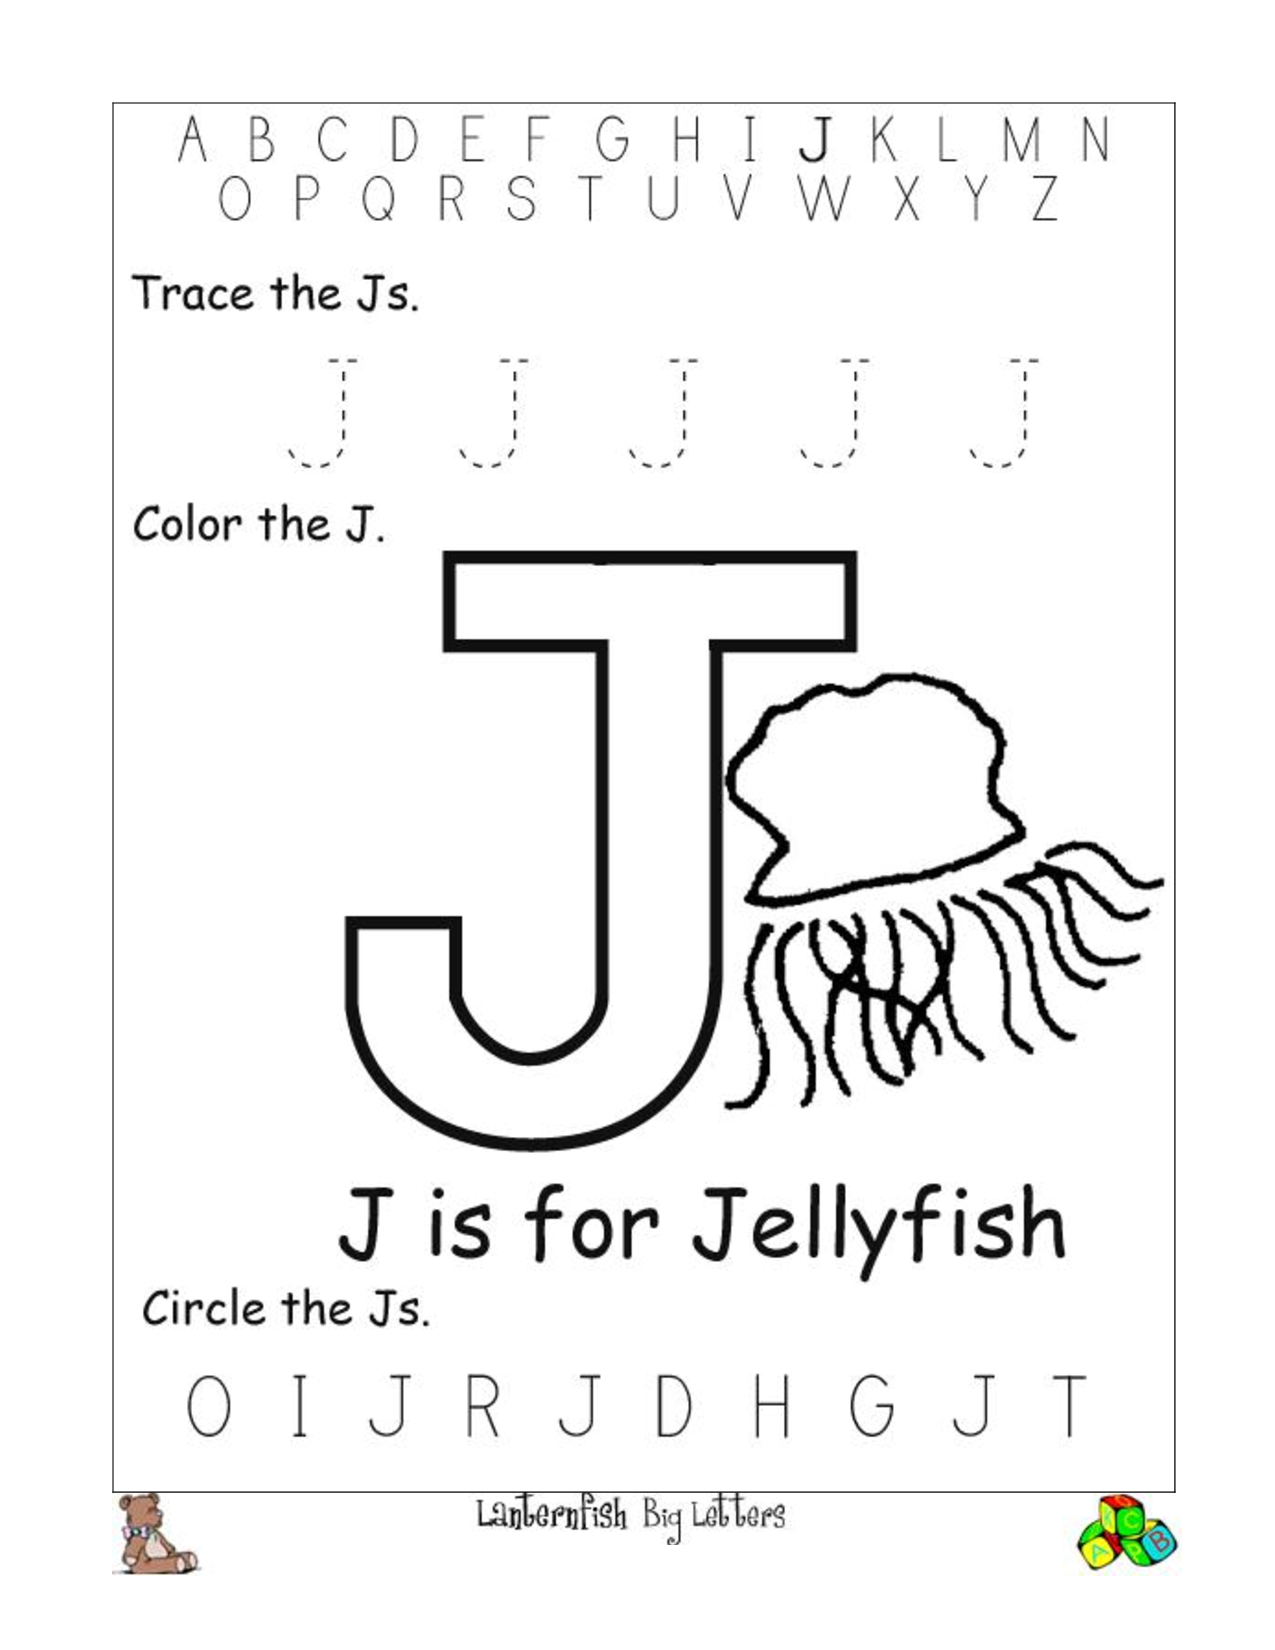 alphabet-worksheets-family-questions-activity-worksheet-therapist-aid-in-2021-family